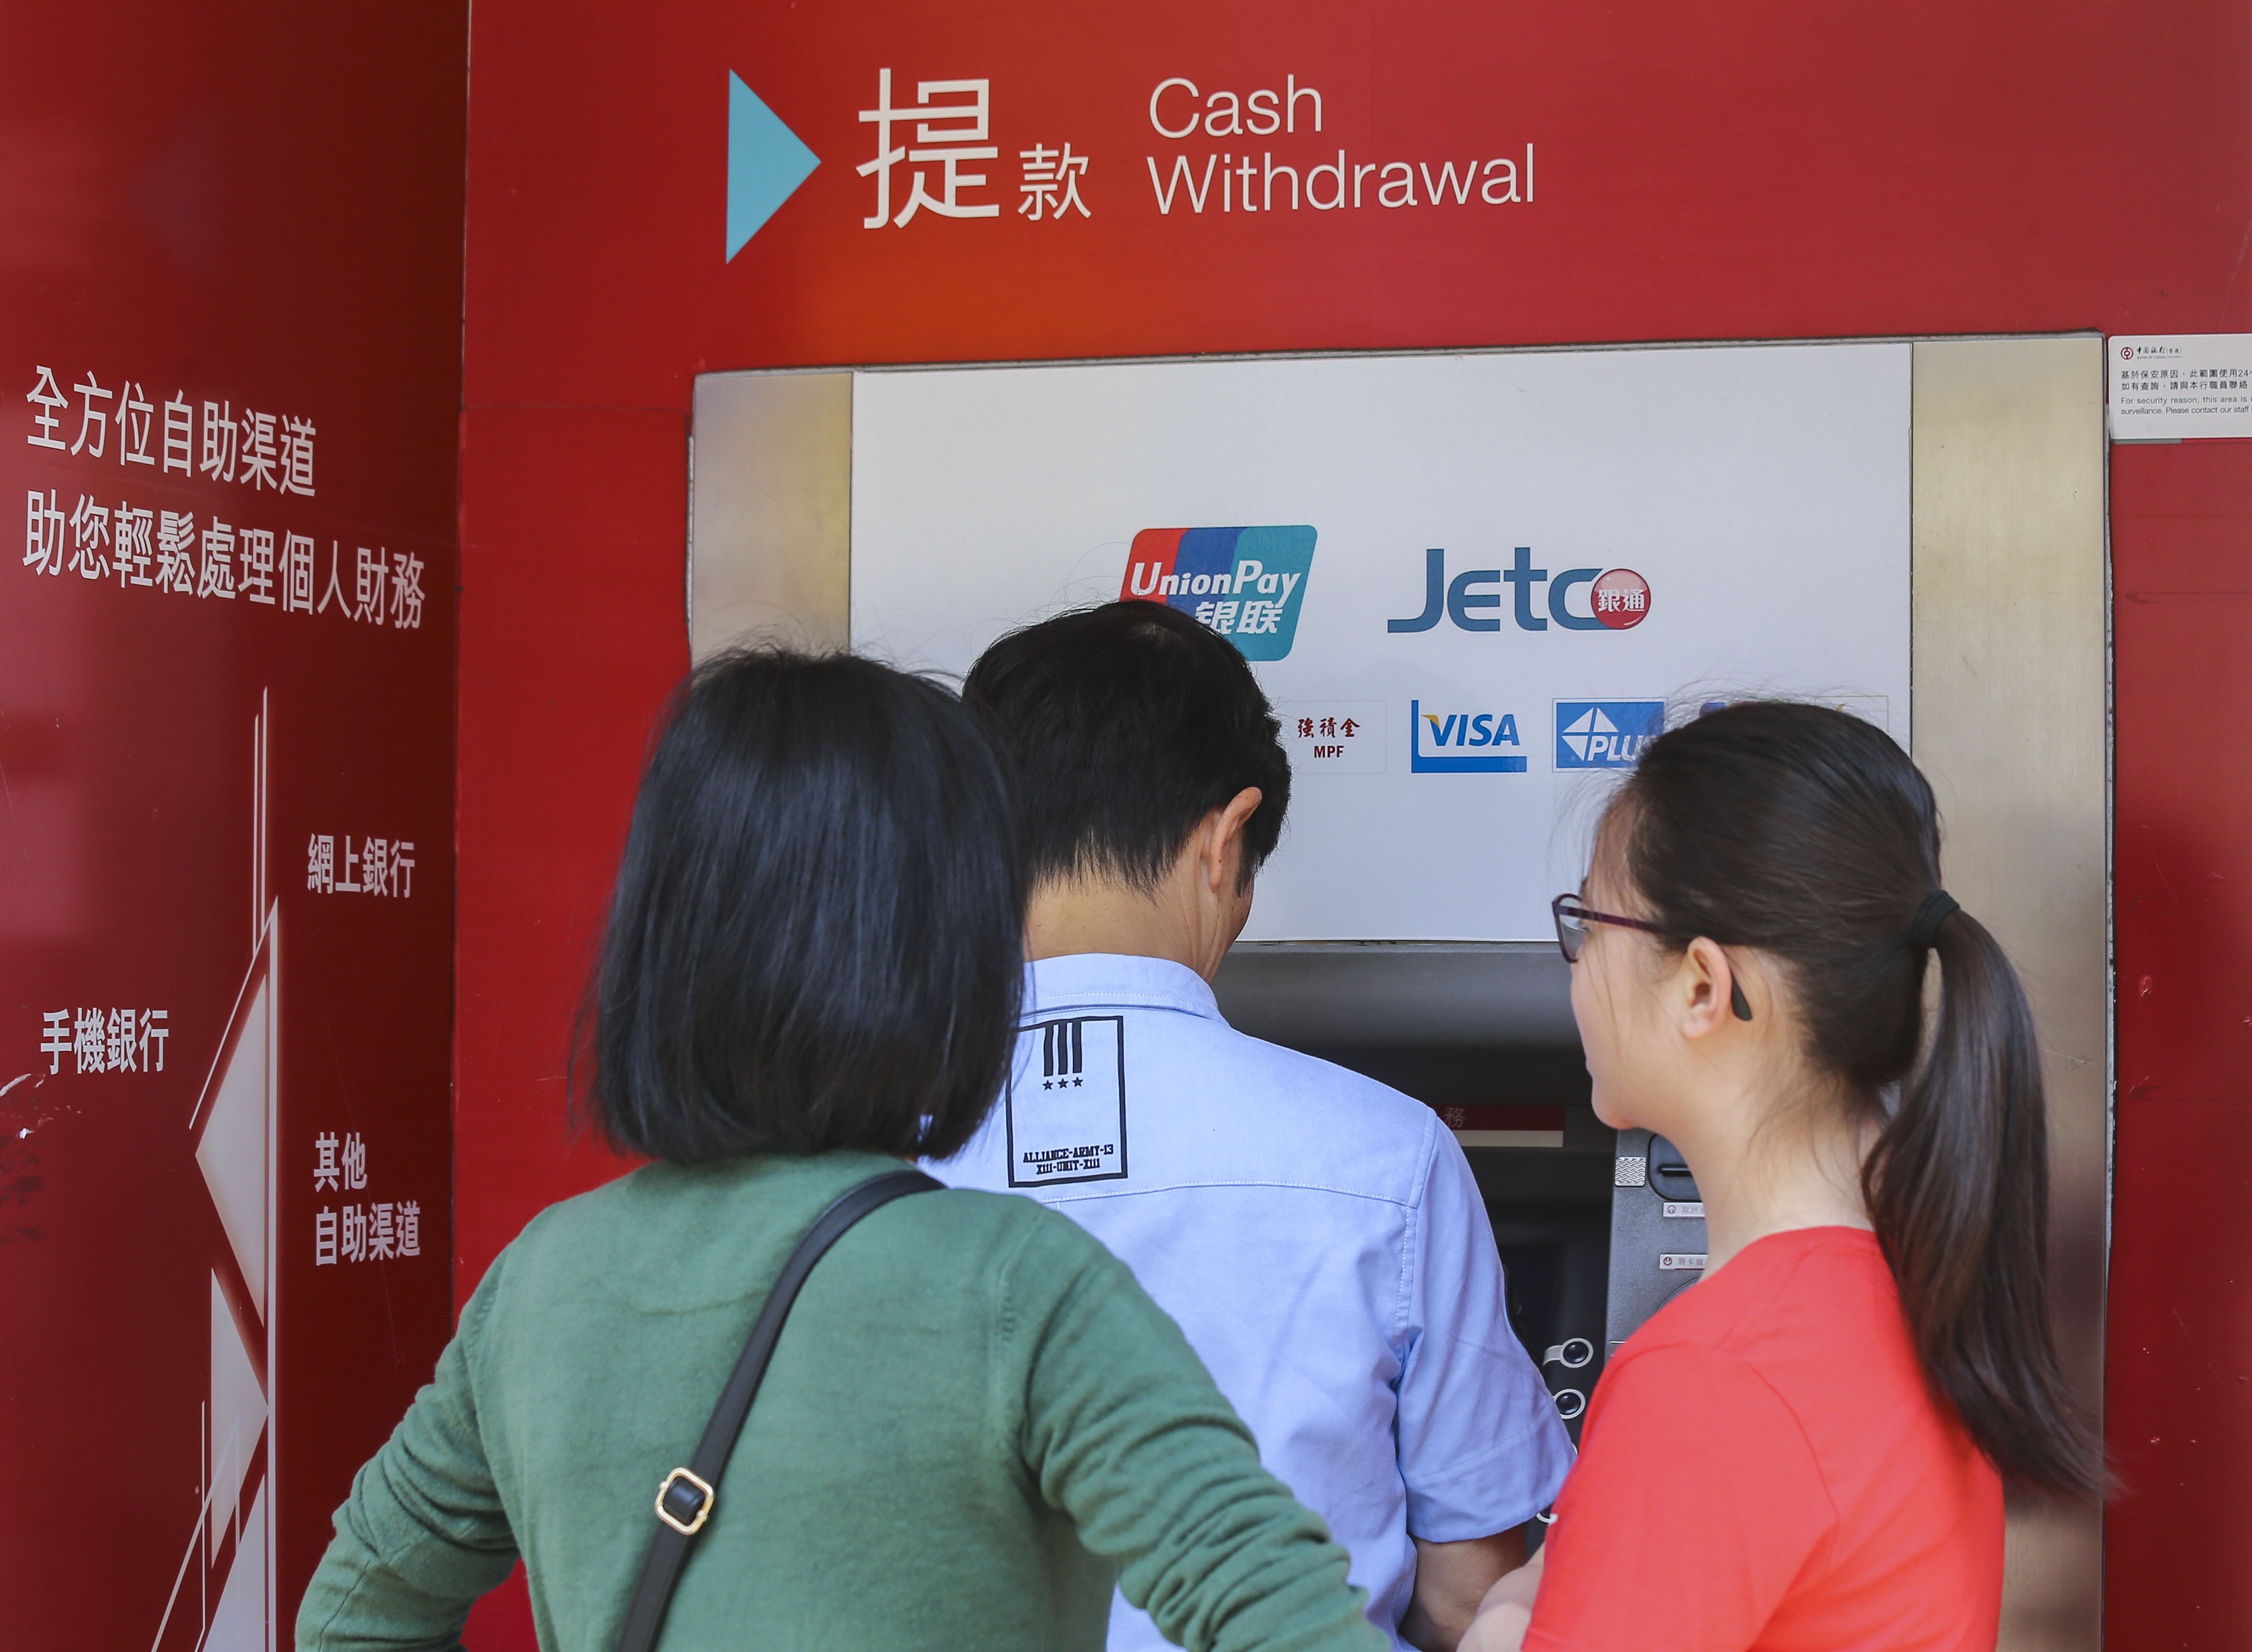 Customers using a Bank of China (Hong Kong) automated teller machine in Hong Kong on 31 March 2018. Photo: SCMP / Dickson Lee